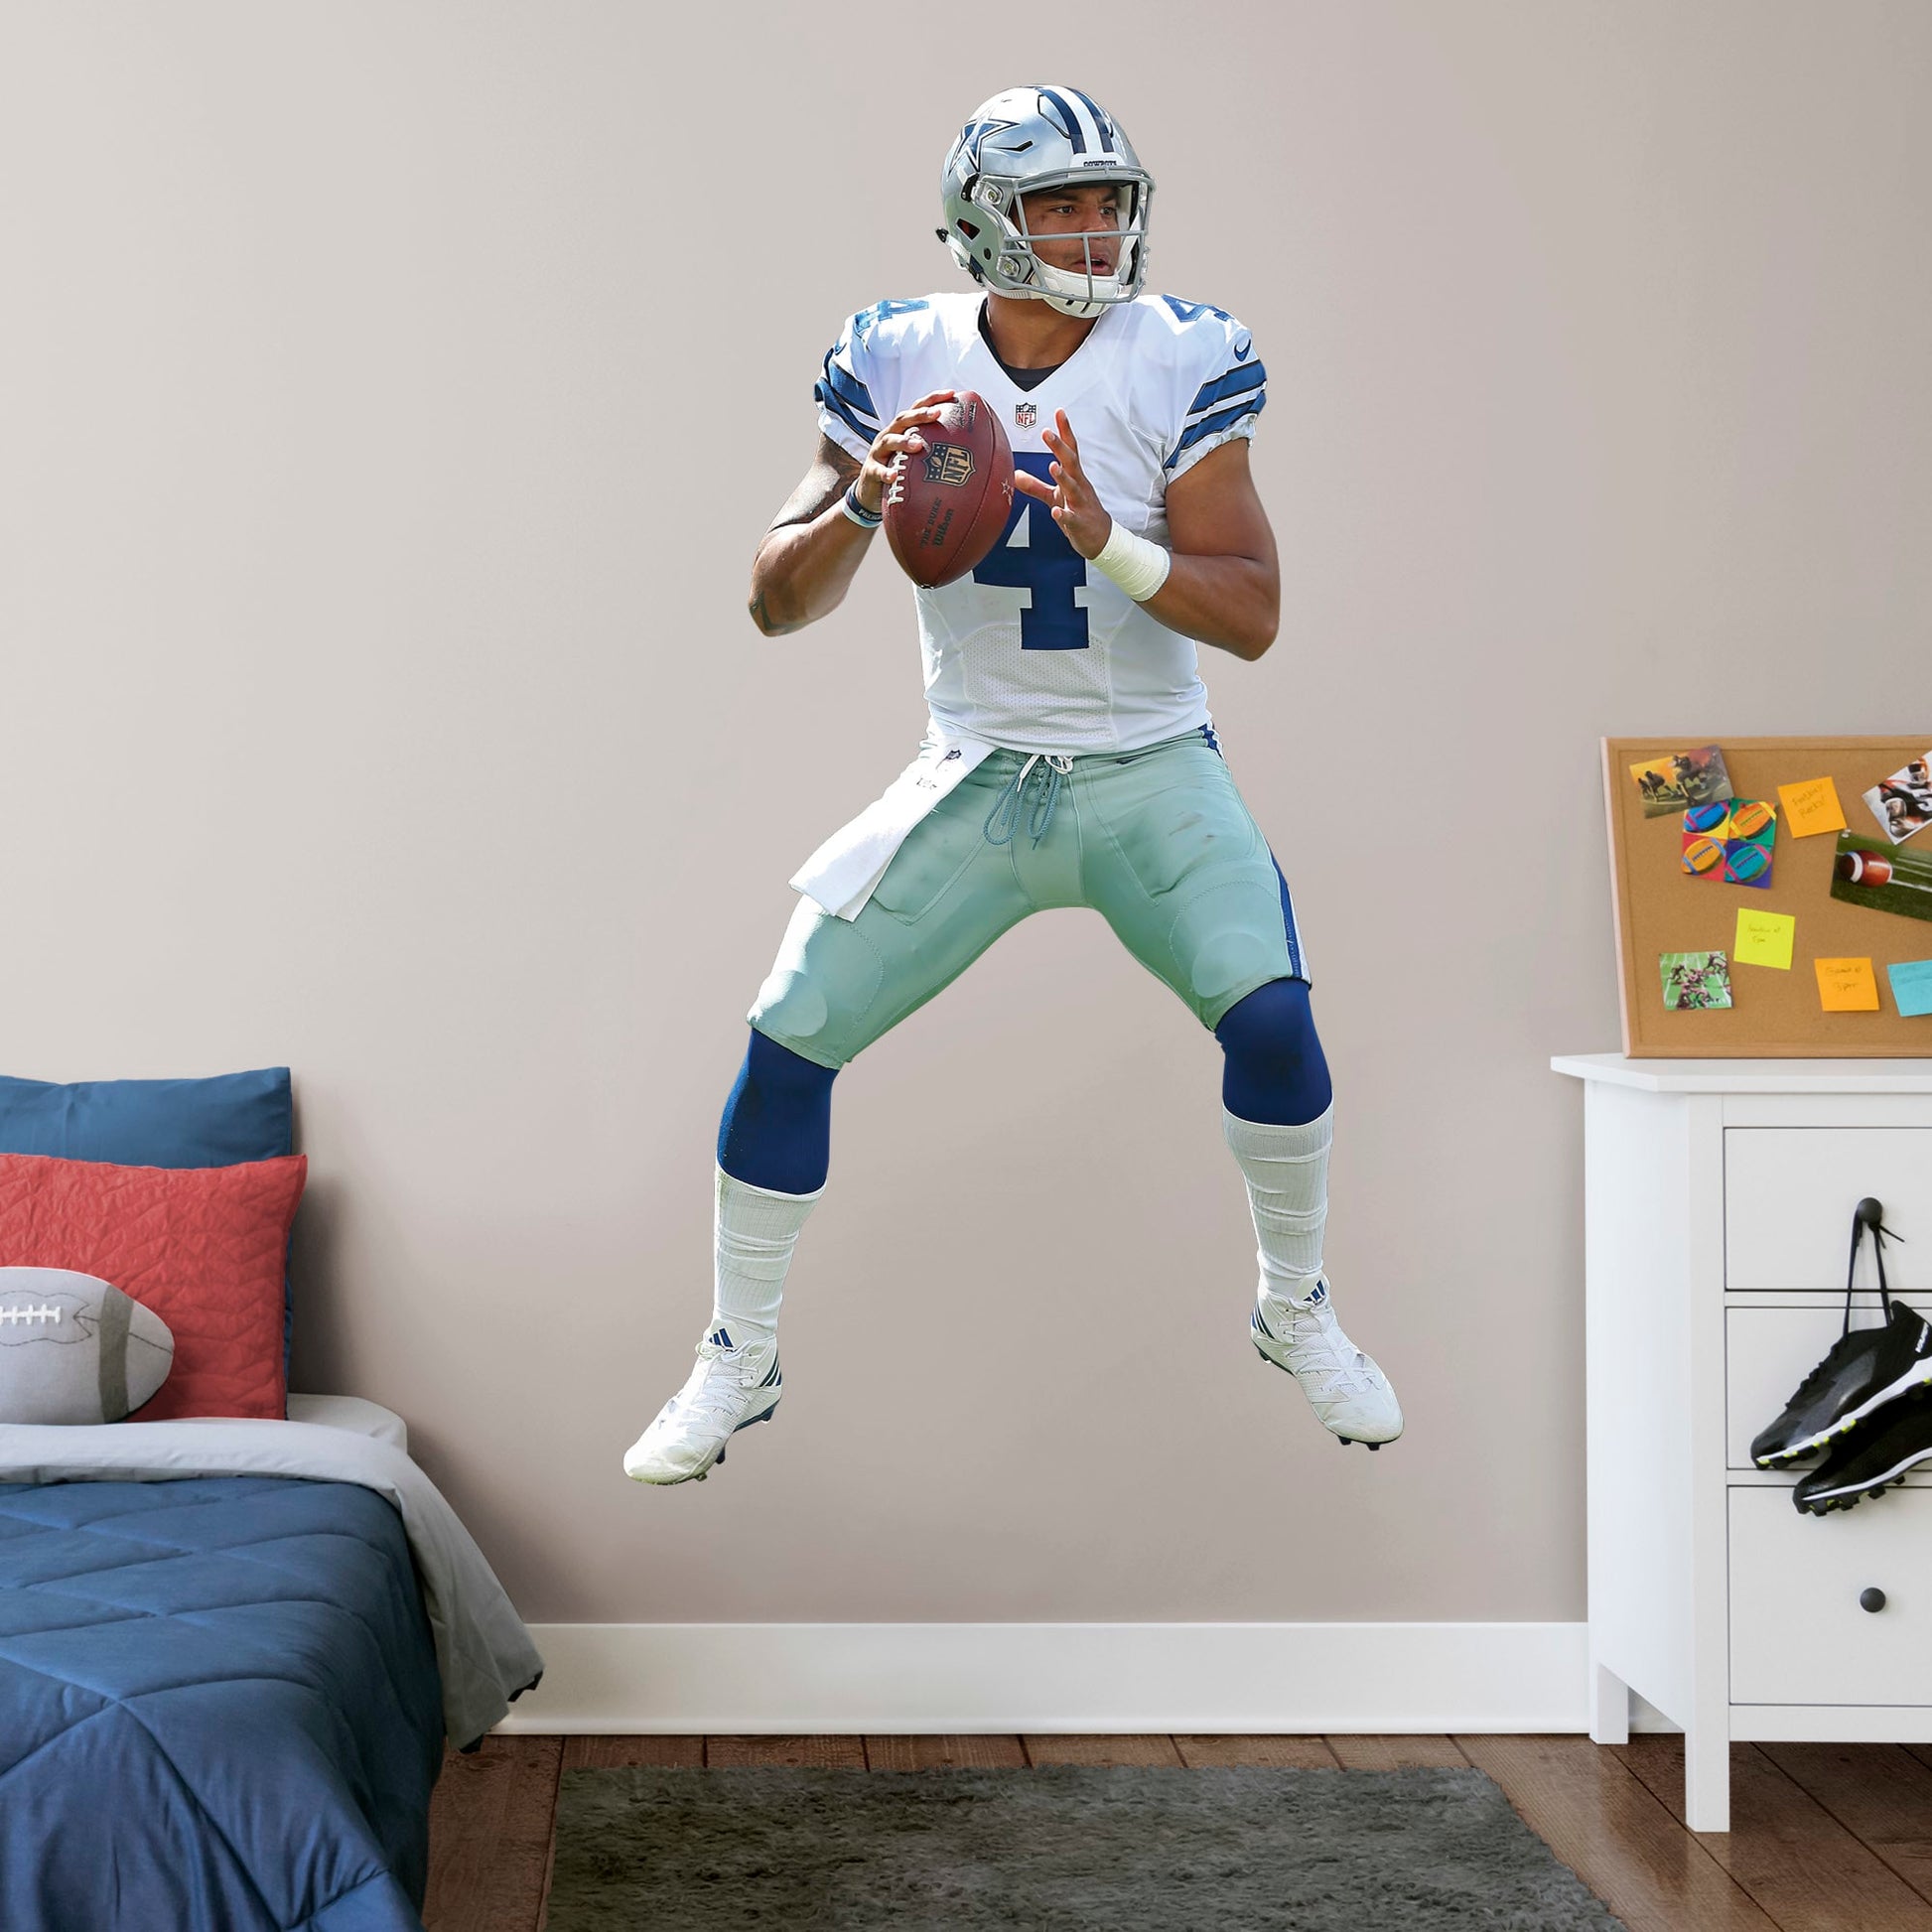 Life-Size Athlete + 2 Decals (43"W x 78"H) Make 4 your personal lucky number and remind yourself that anything is possible with a high-quality, life-sized Dak Prescott vinyl decal. Turn your favorite room, man cave, or playroom into Cowboys Stadium, complete with Prescott getting ready to throw for the touchdown. Count on this durable decal to be just as tough as your favorite quarterback - it's designed to be easily removed and reused over and over again.